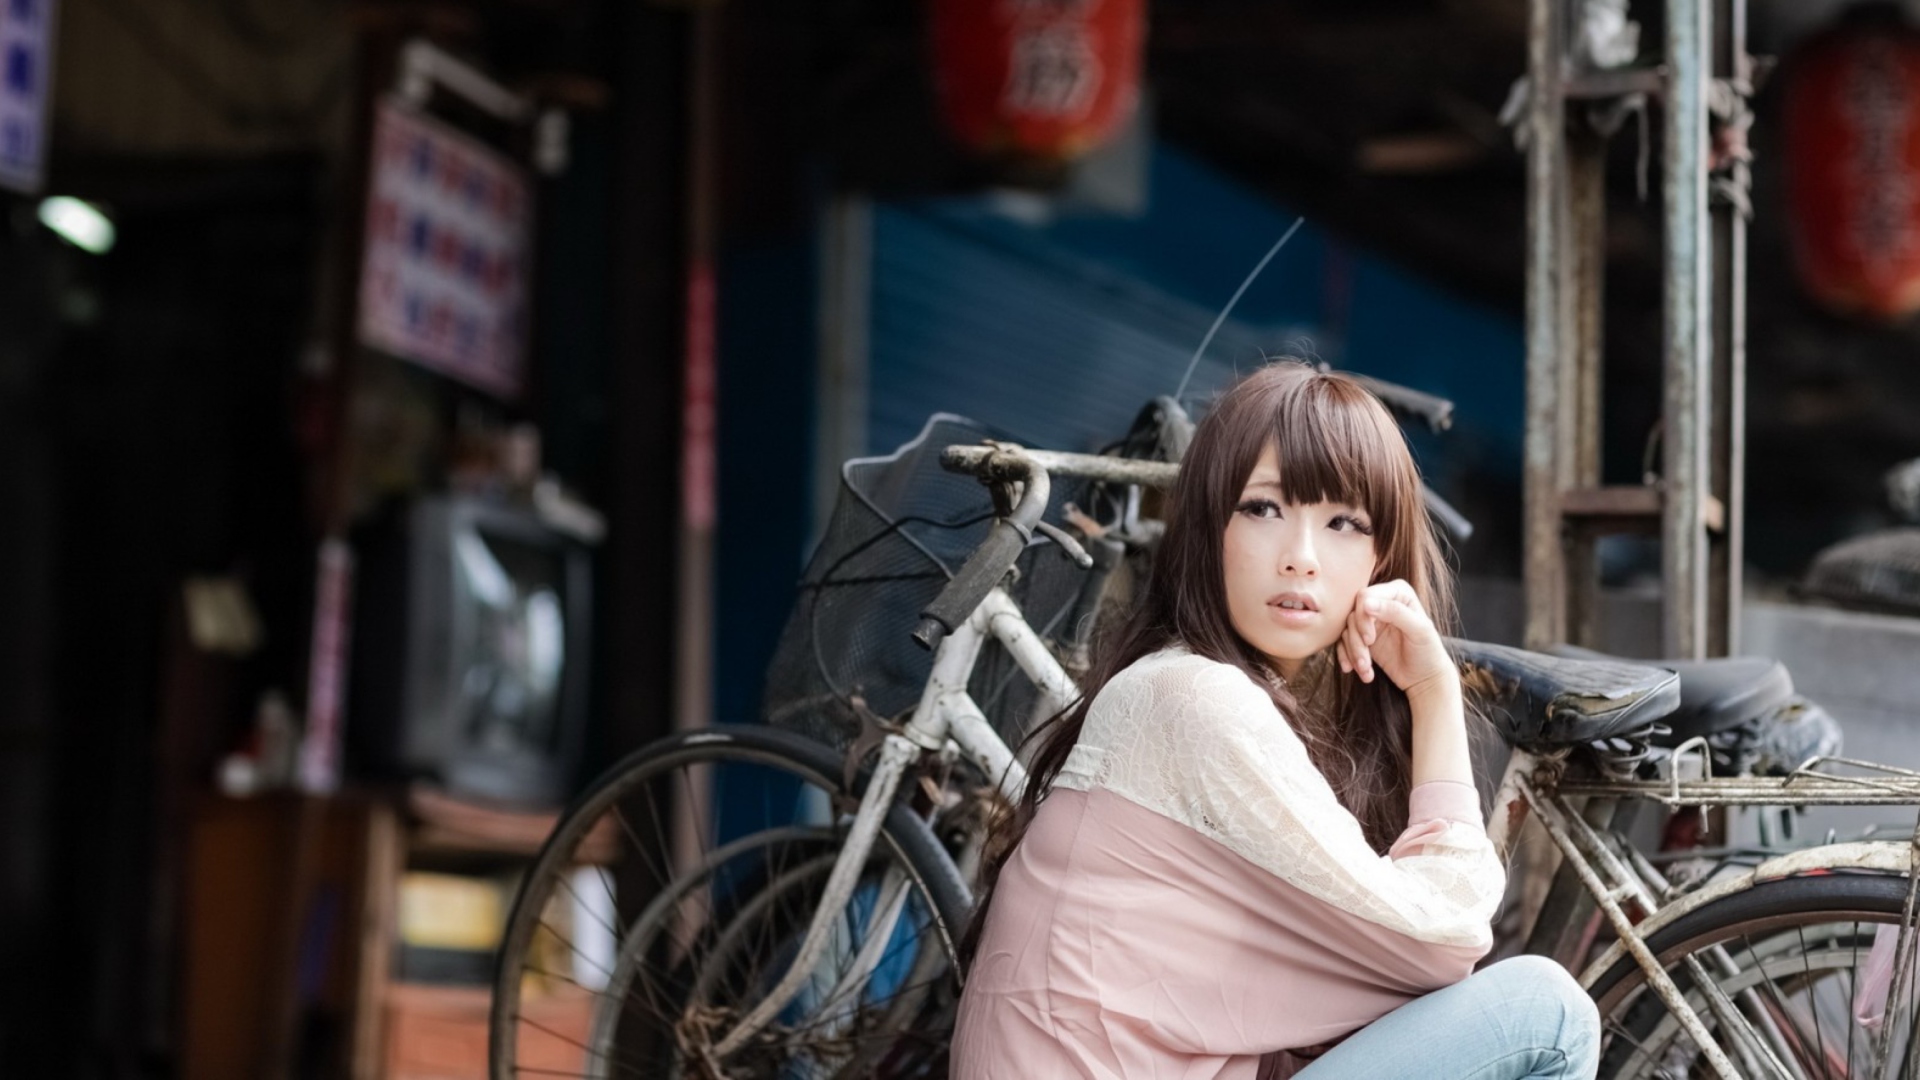 Cute Asian Girl With Bicycle wallpaper 1920x1080